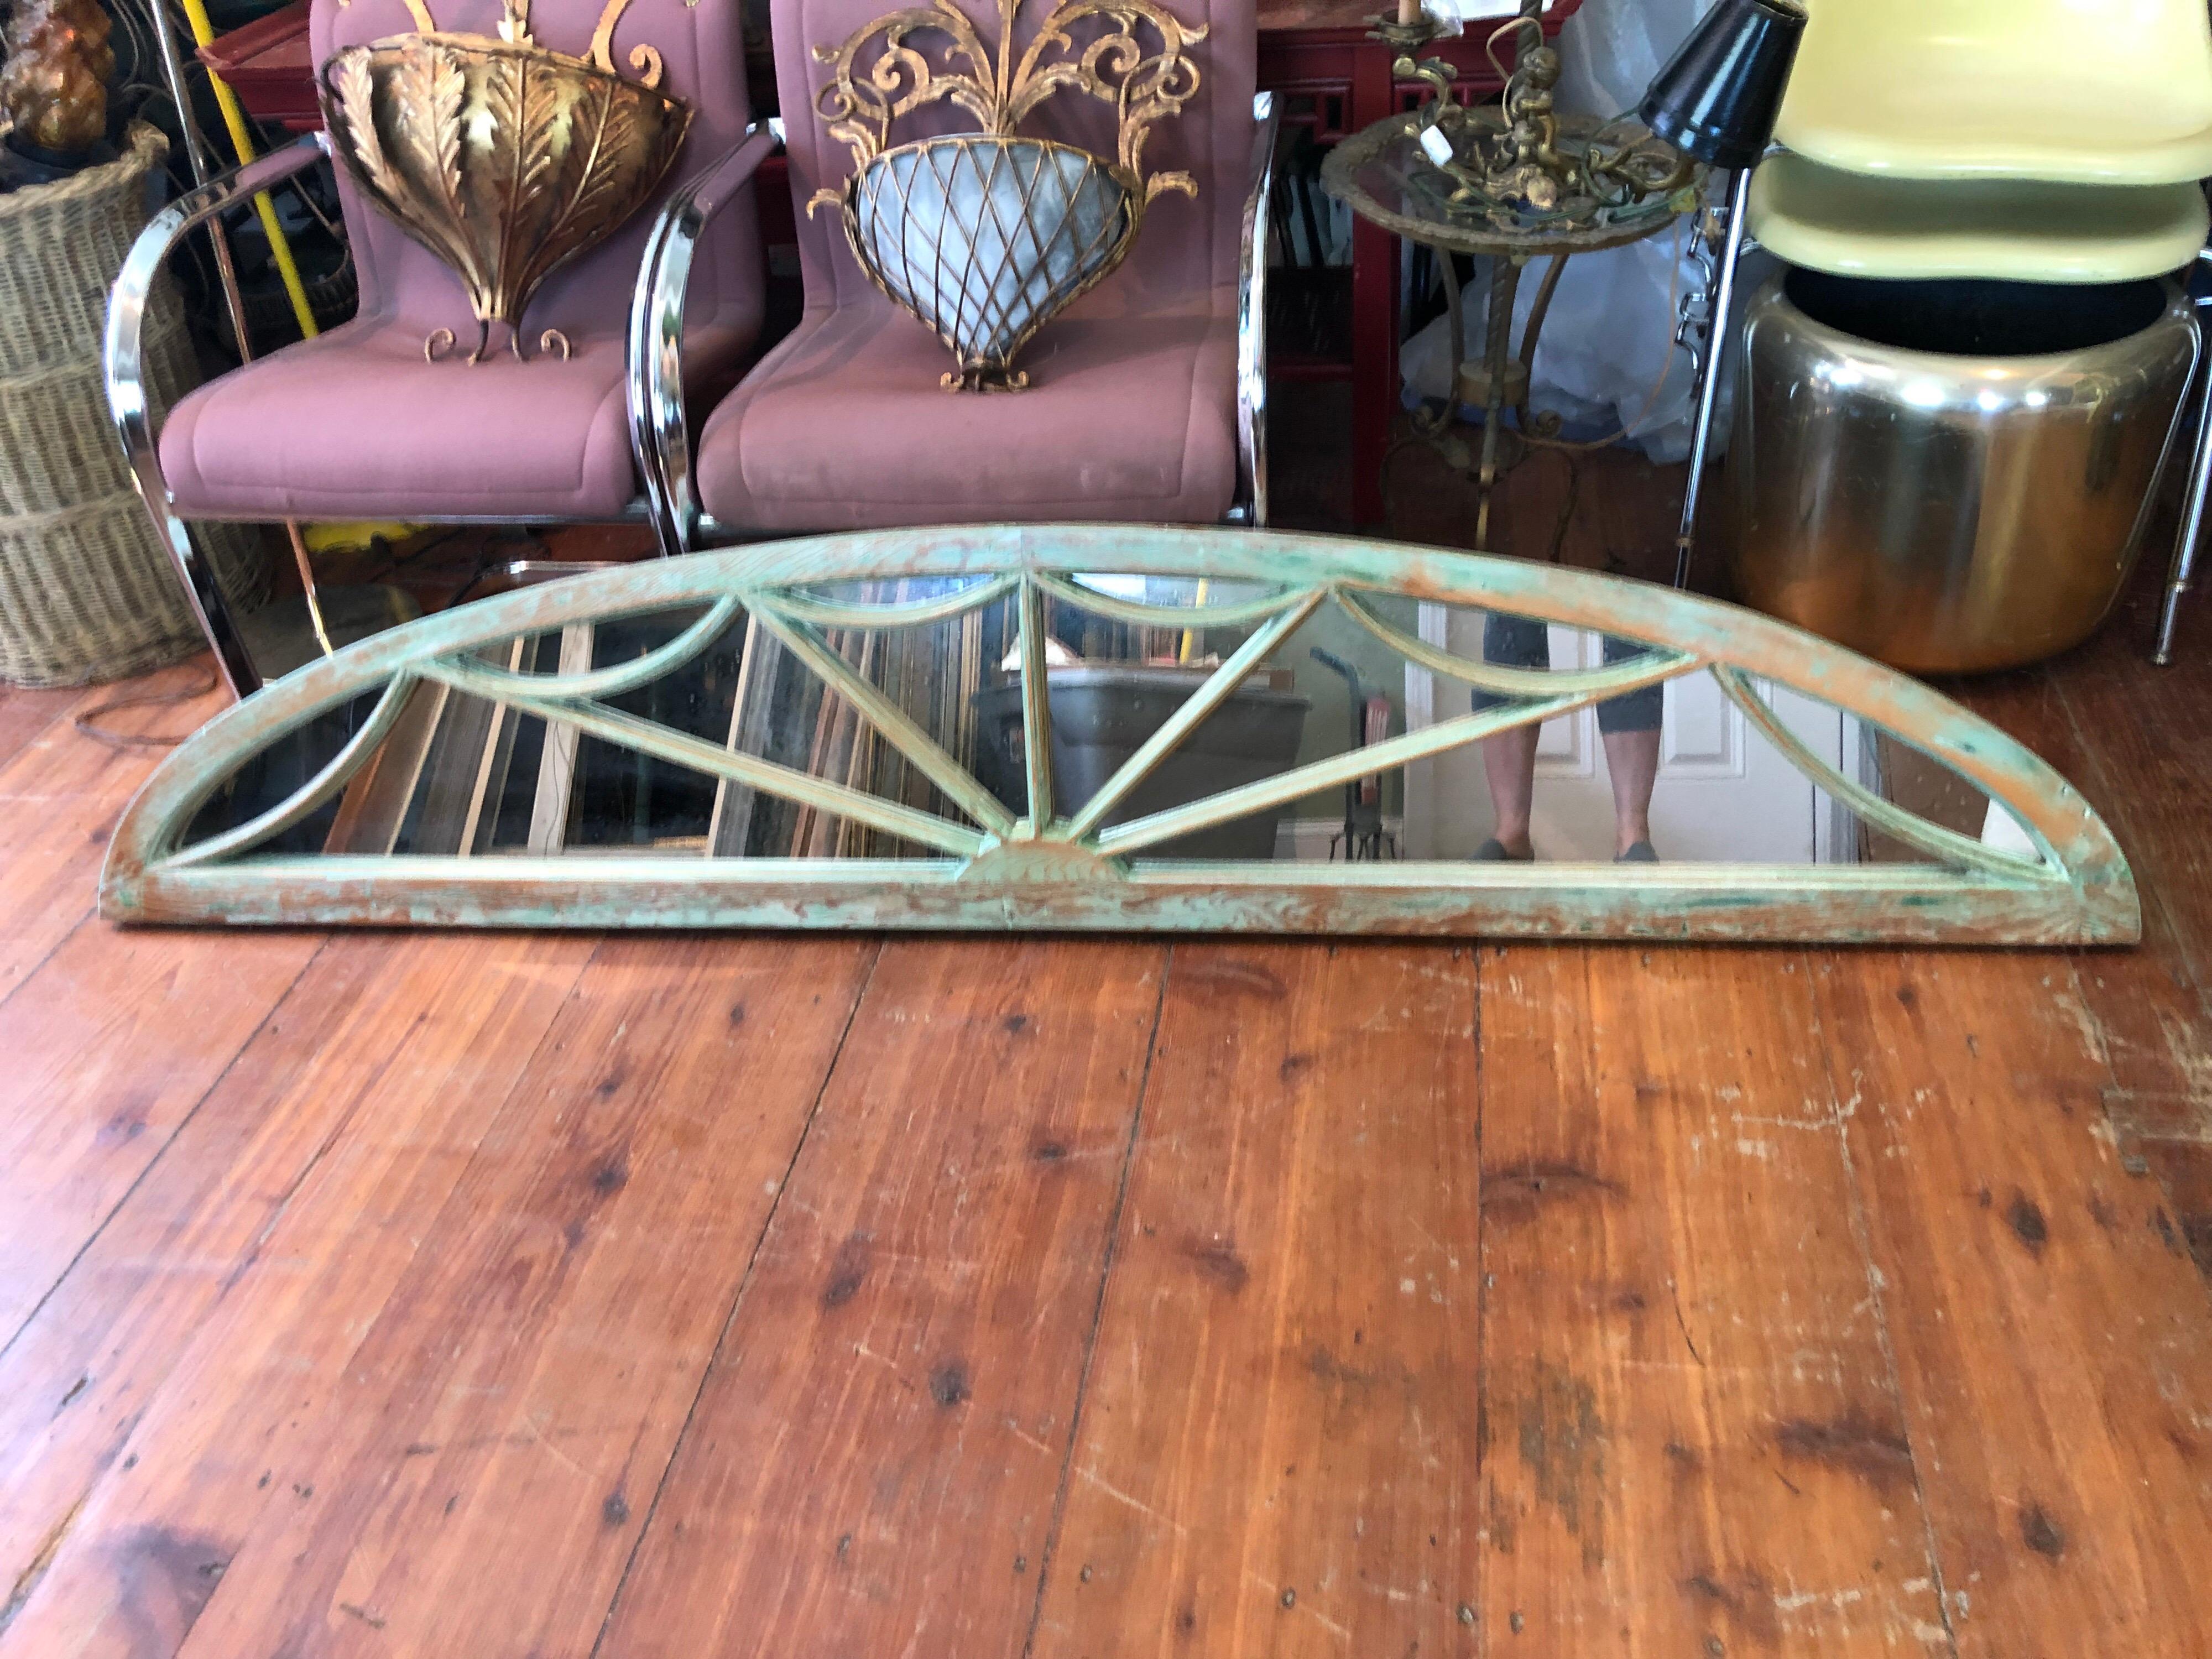 Architectural demilune transom mirror. Nice green washed pine wood.